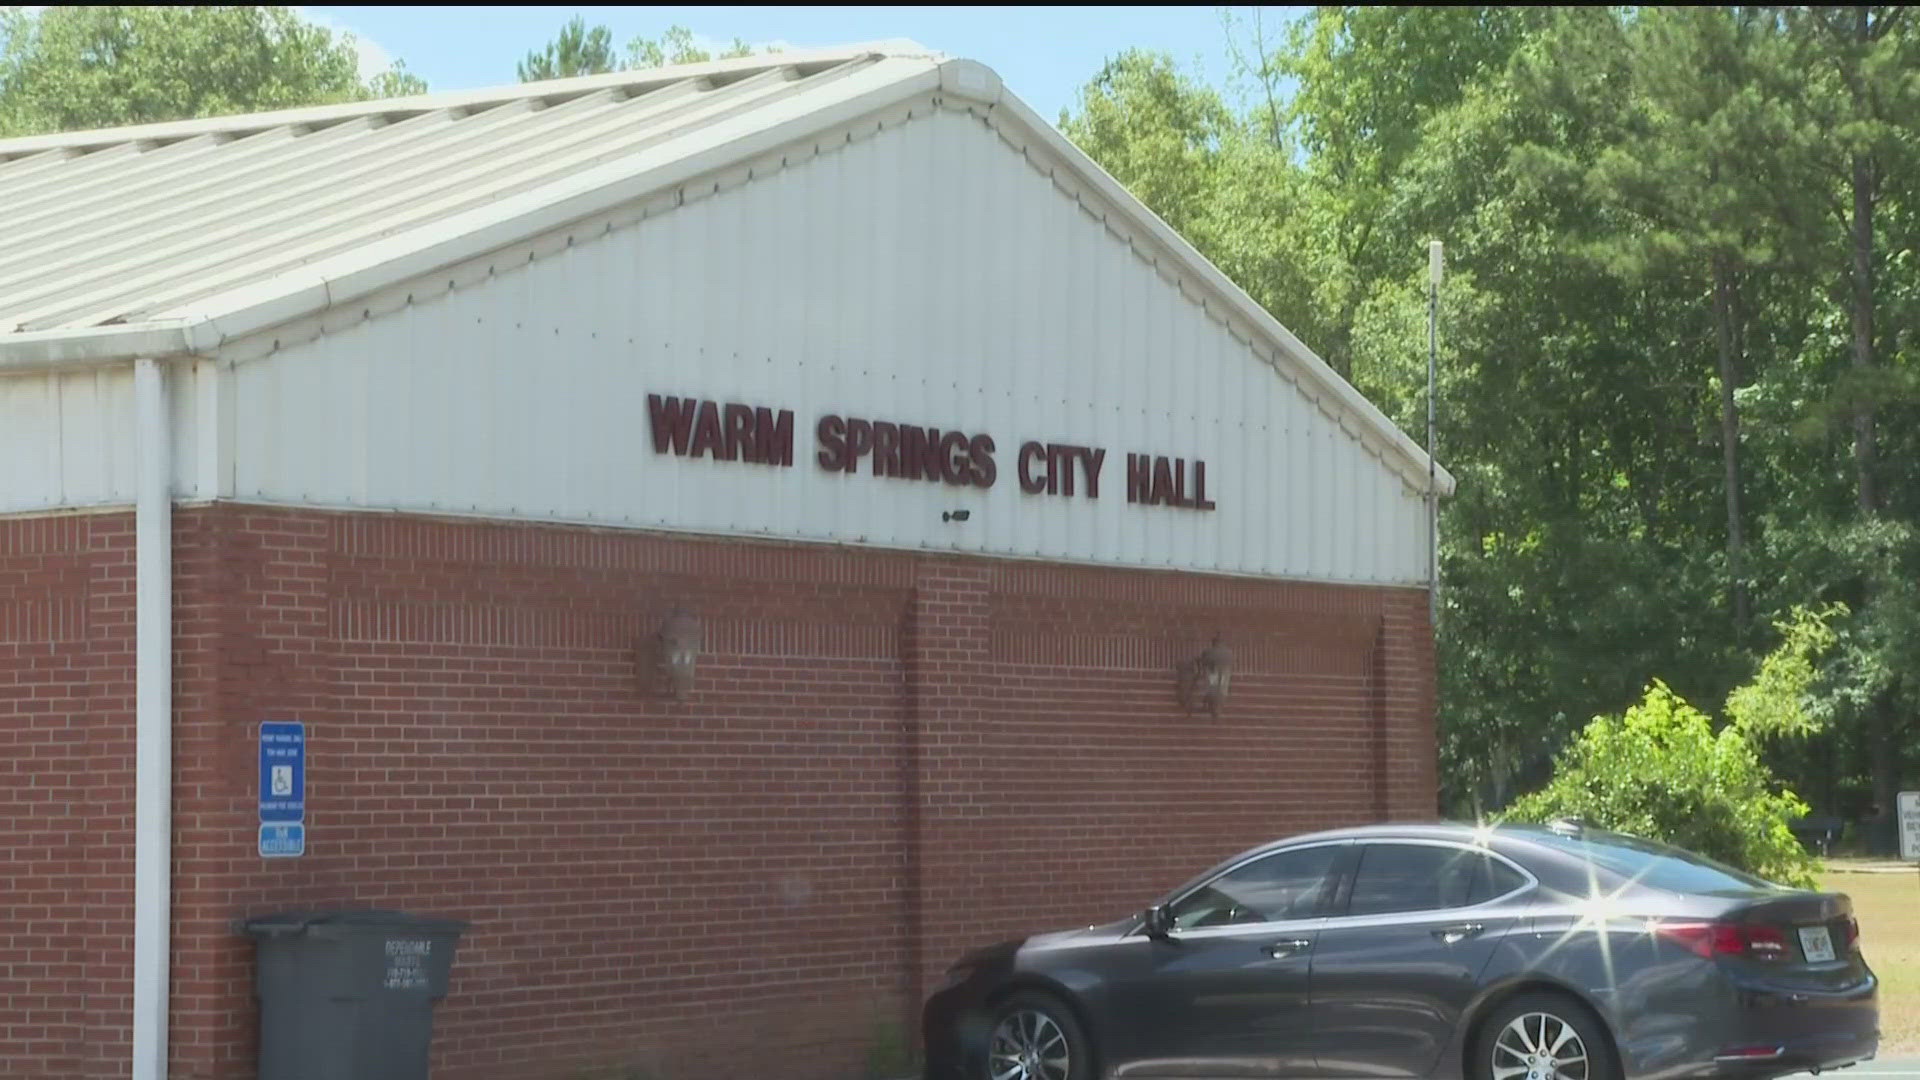 11Alive's Cody Alcorn breaks down how cases in Warm Springs could be in jeopardy after the police chief was fired and the rest of the force was suspended.